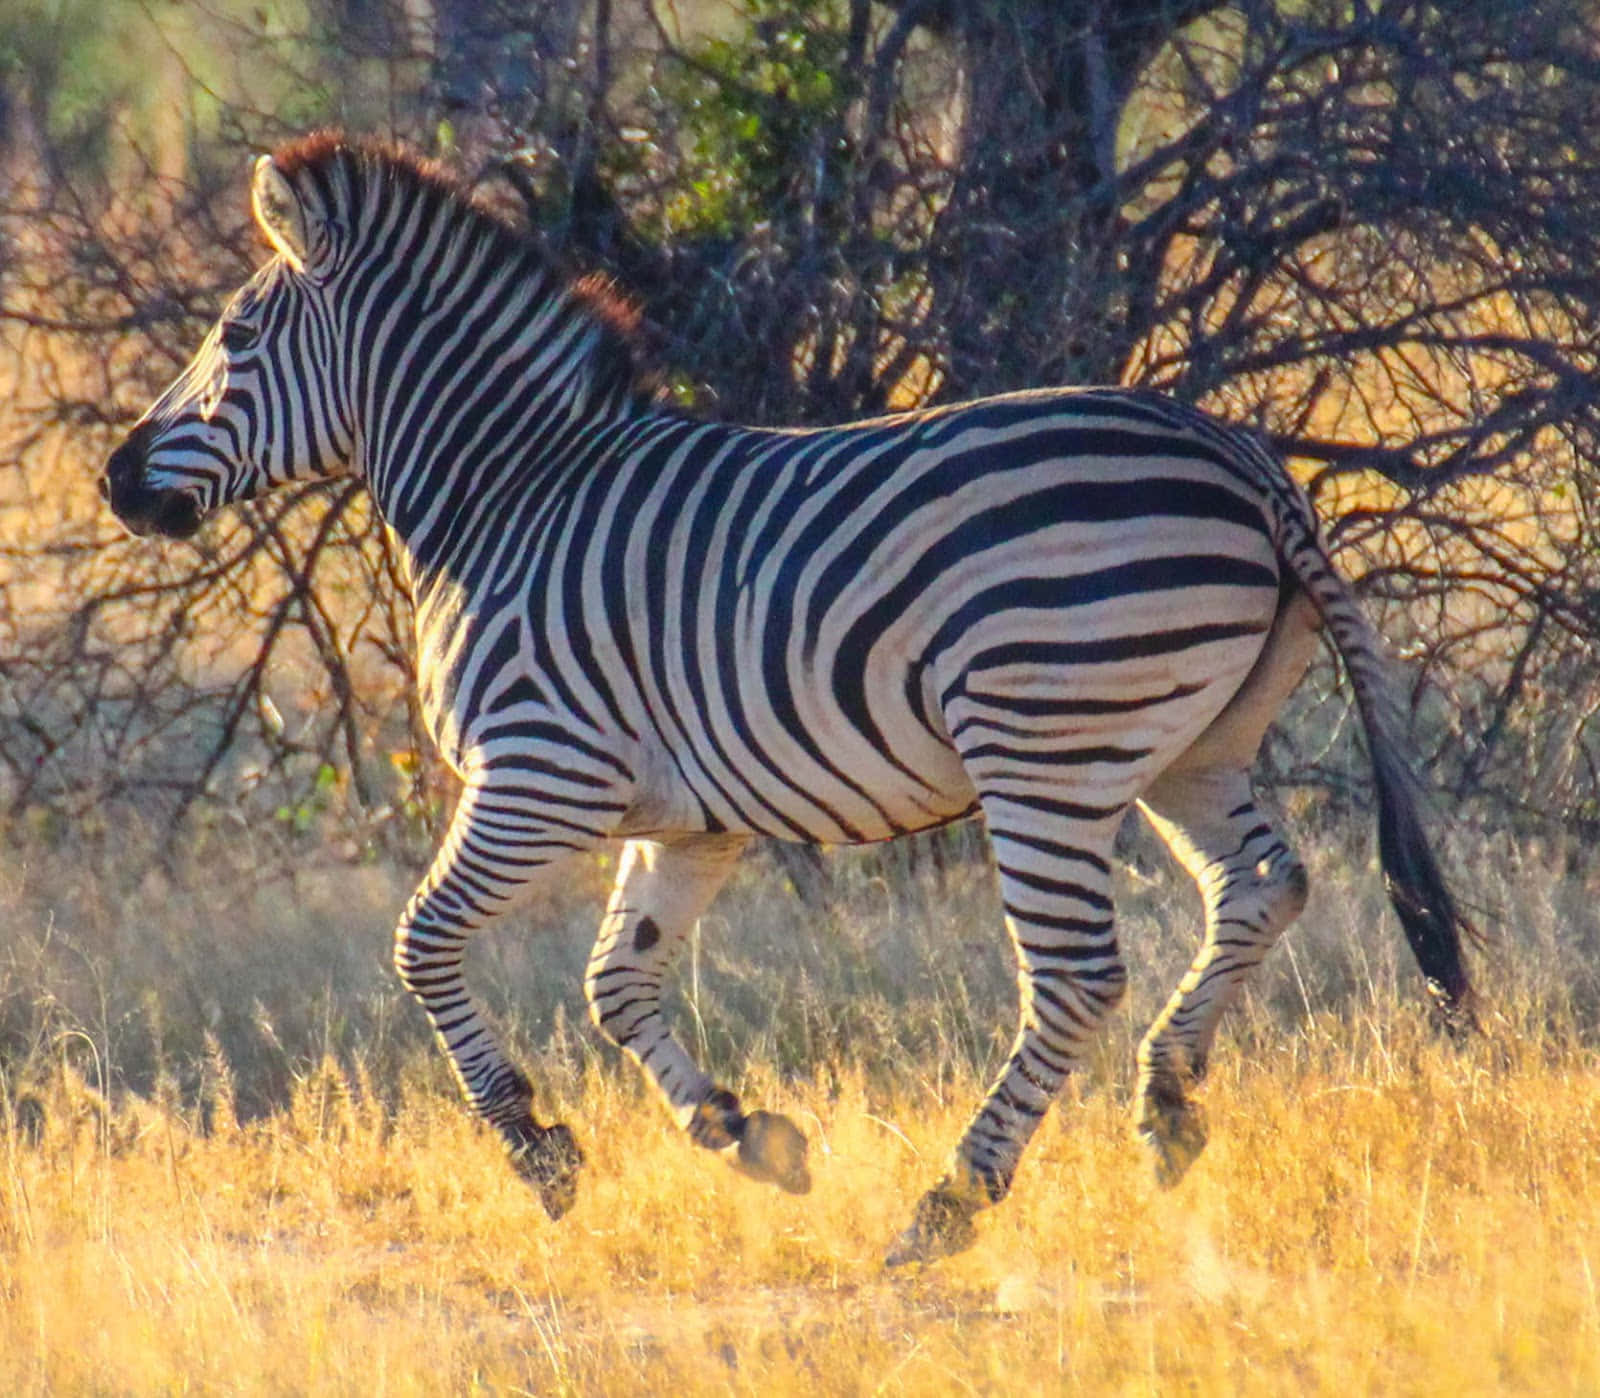 A zebra amongst other animals in the African safari.